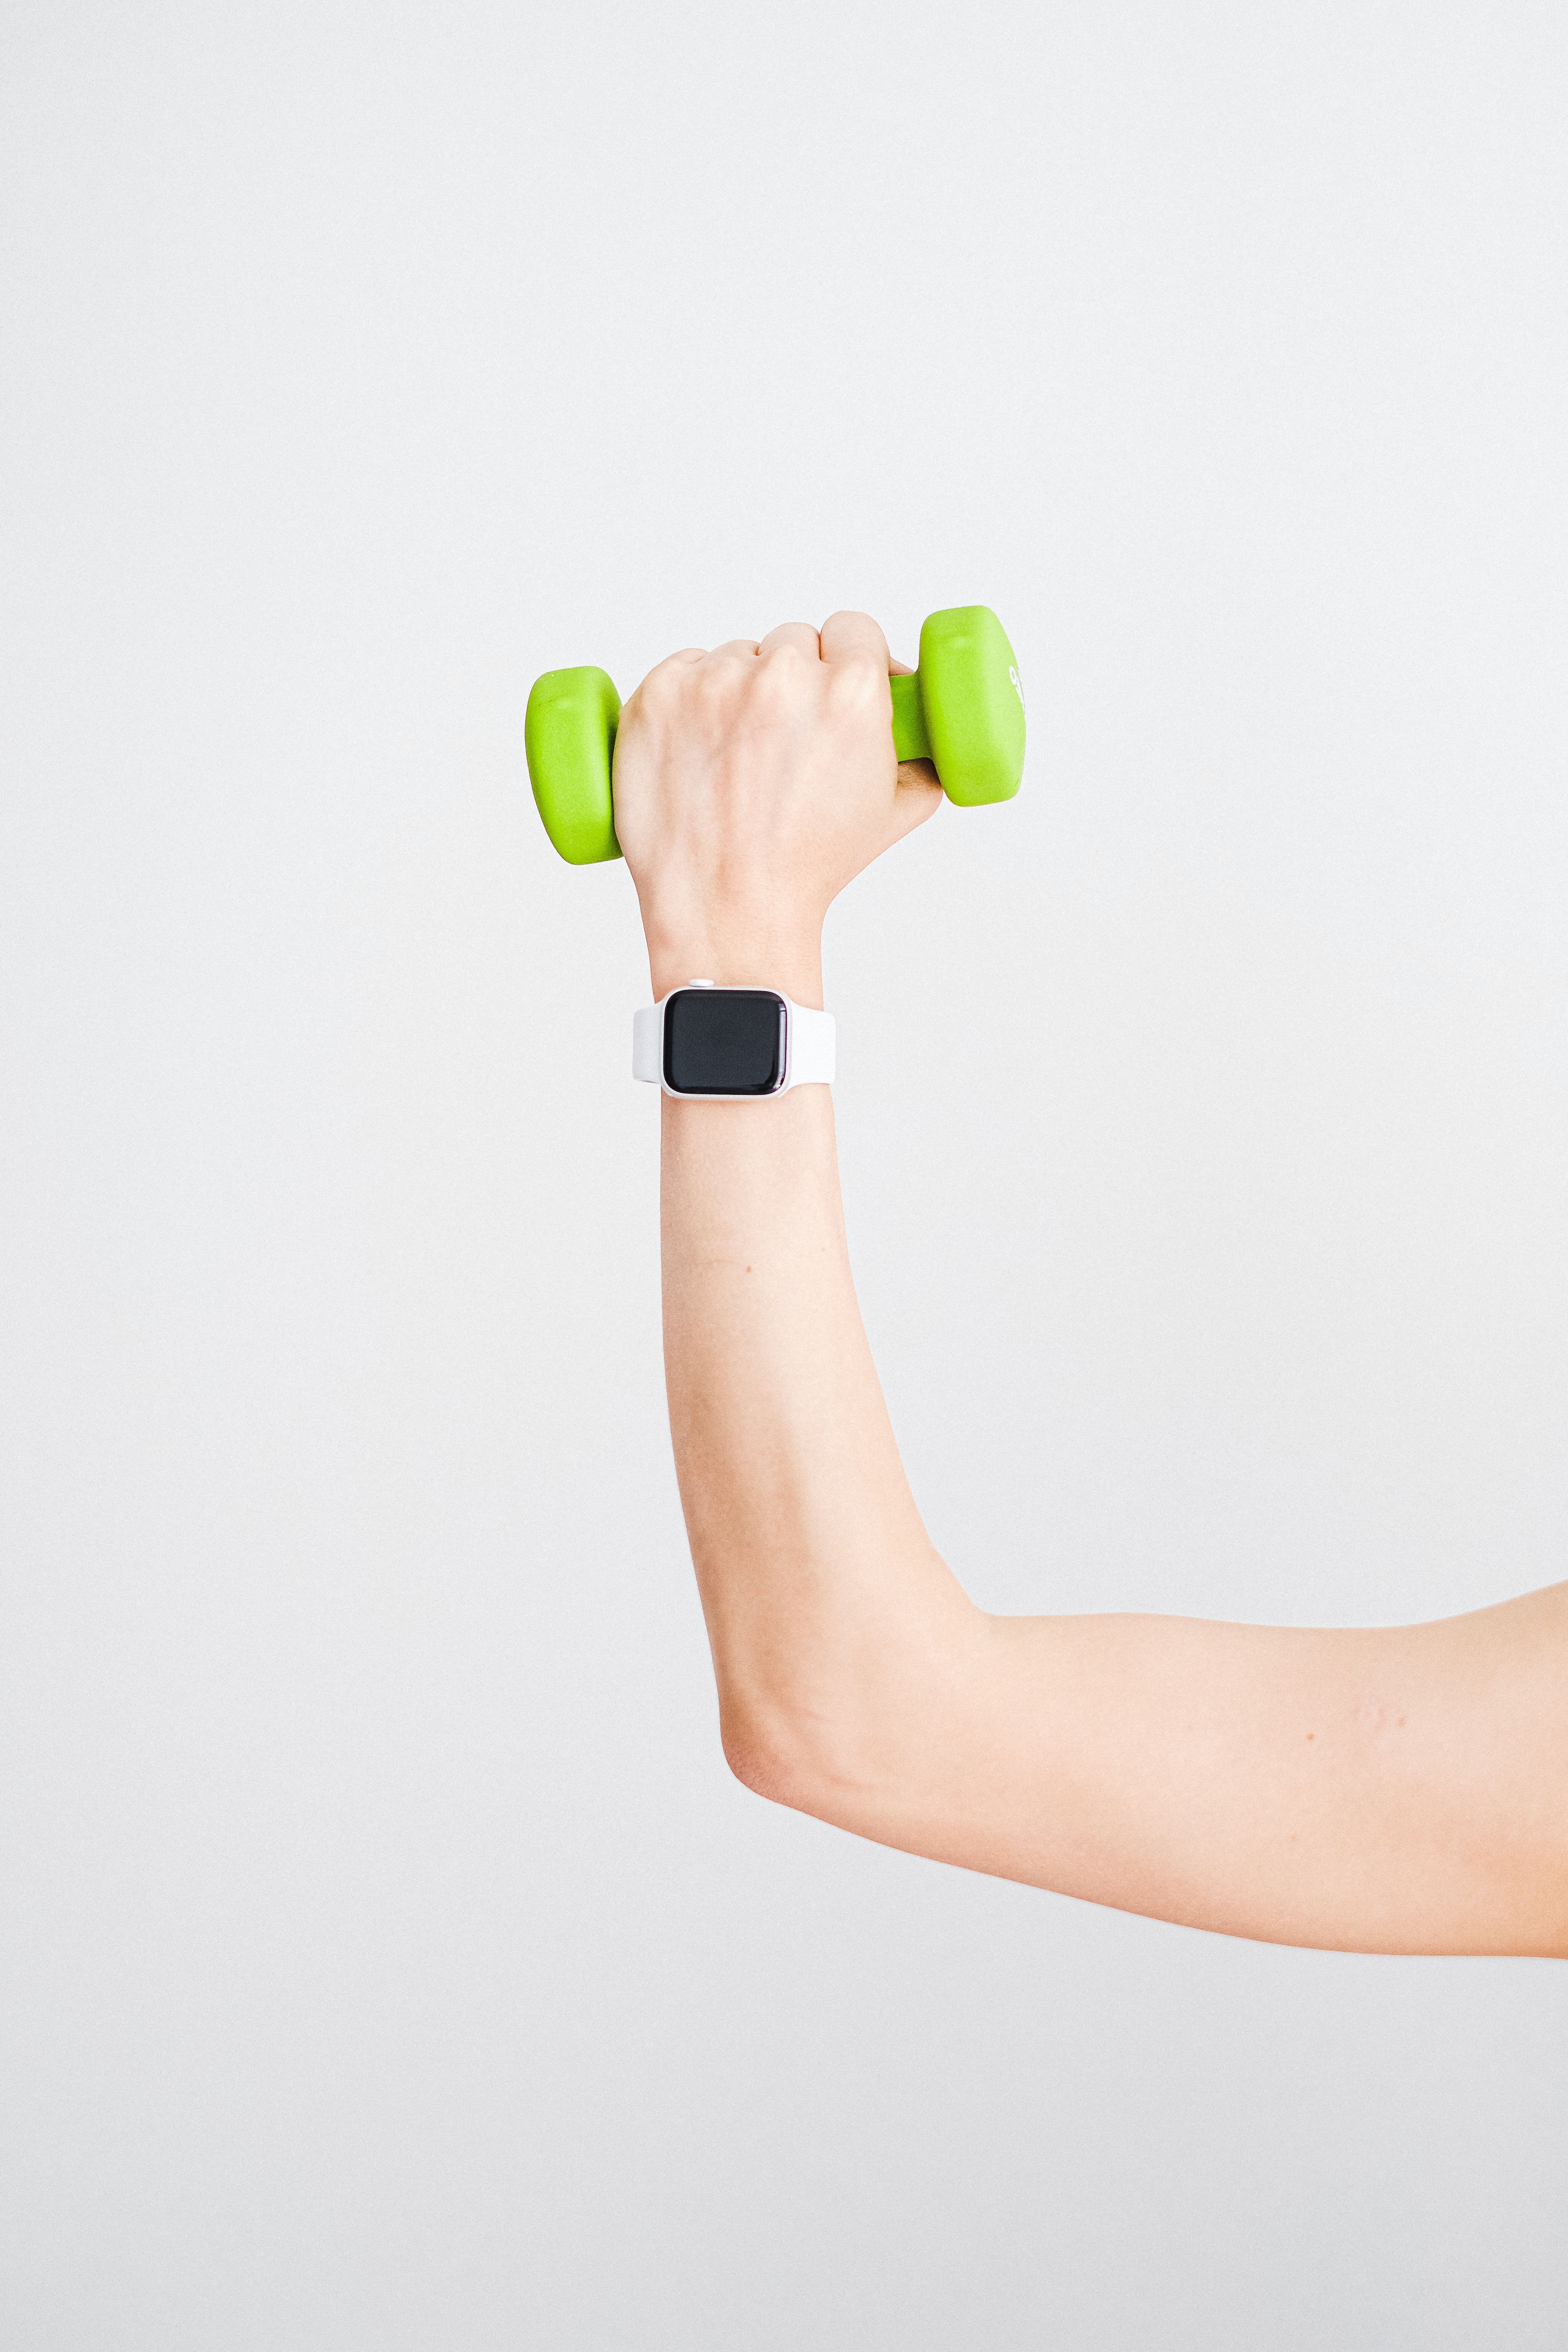 Person holding dumbbell in air.